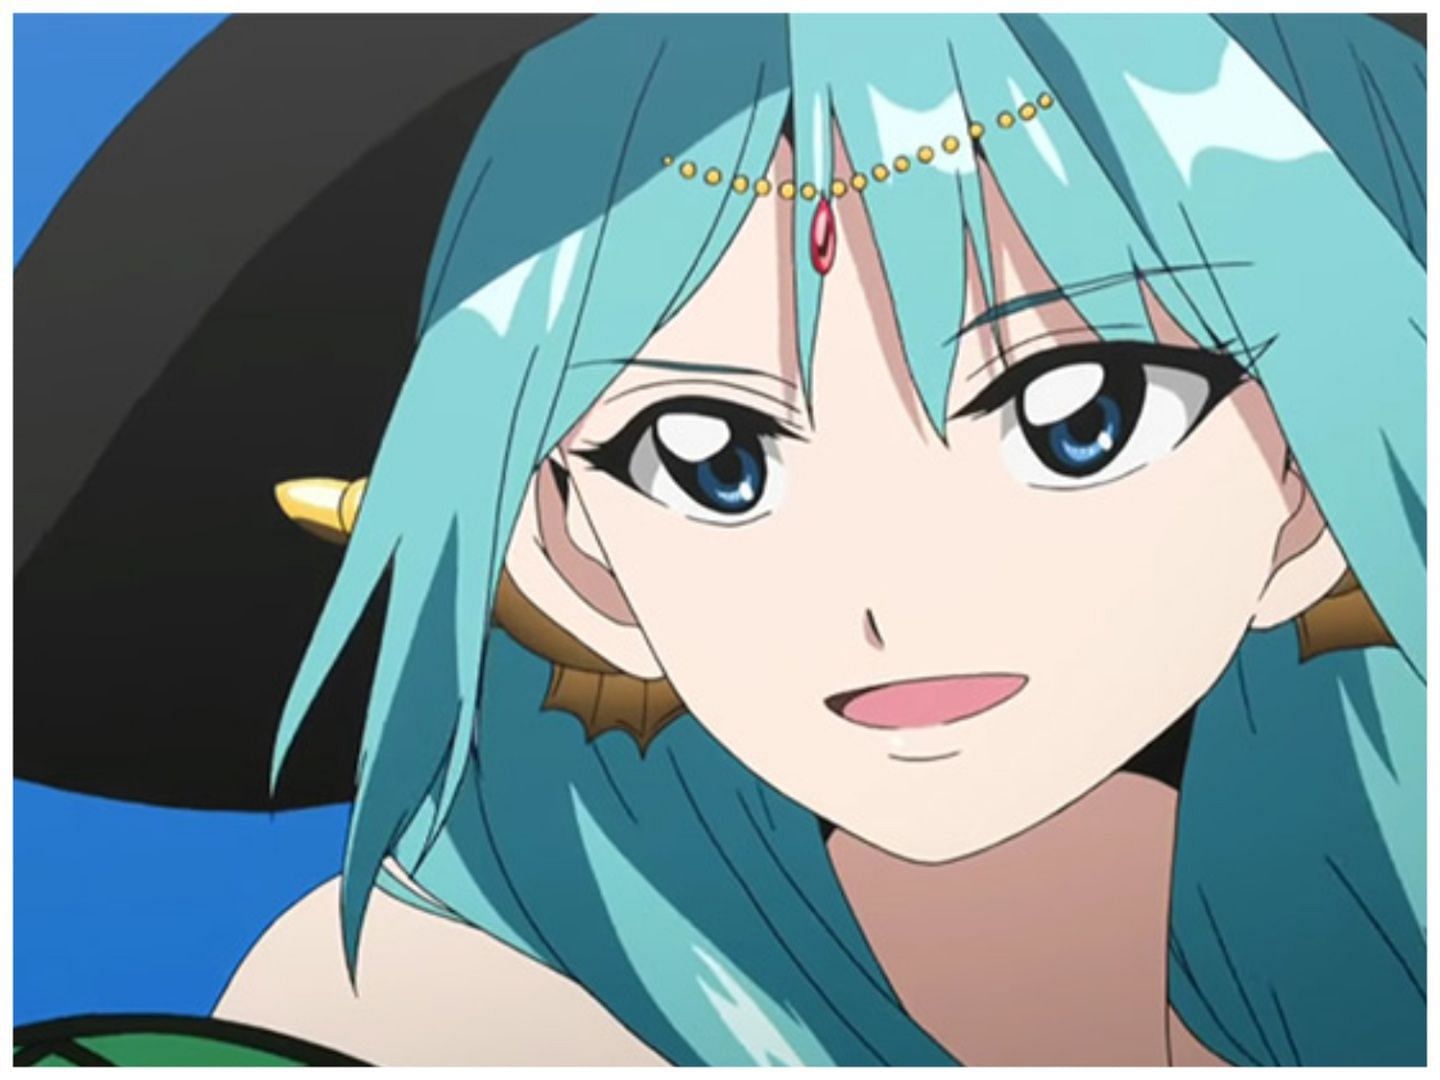 Magi: The Labyrinth of Magic is a Japanese anime series directed by Koji Masunari. (Image via A-1 Pictures)